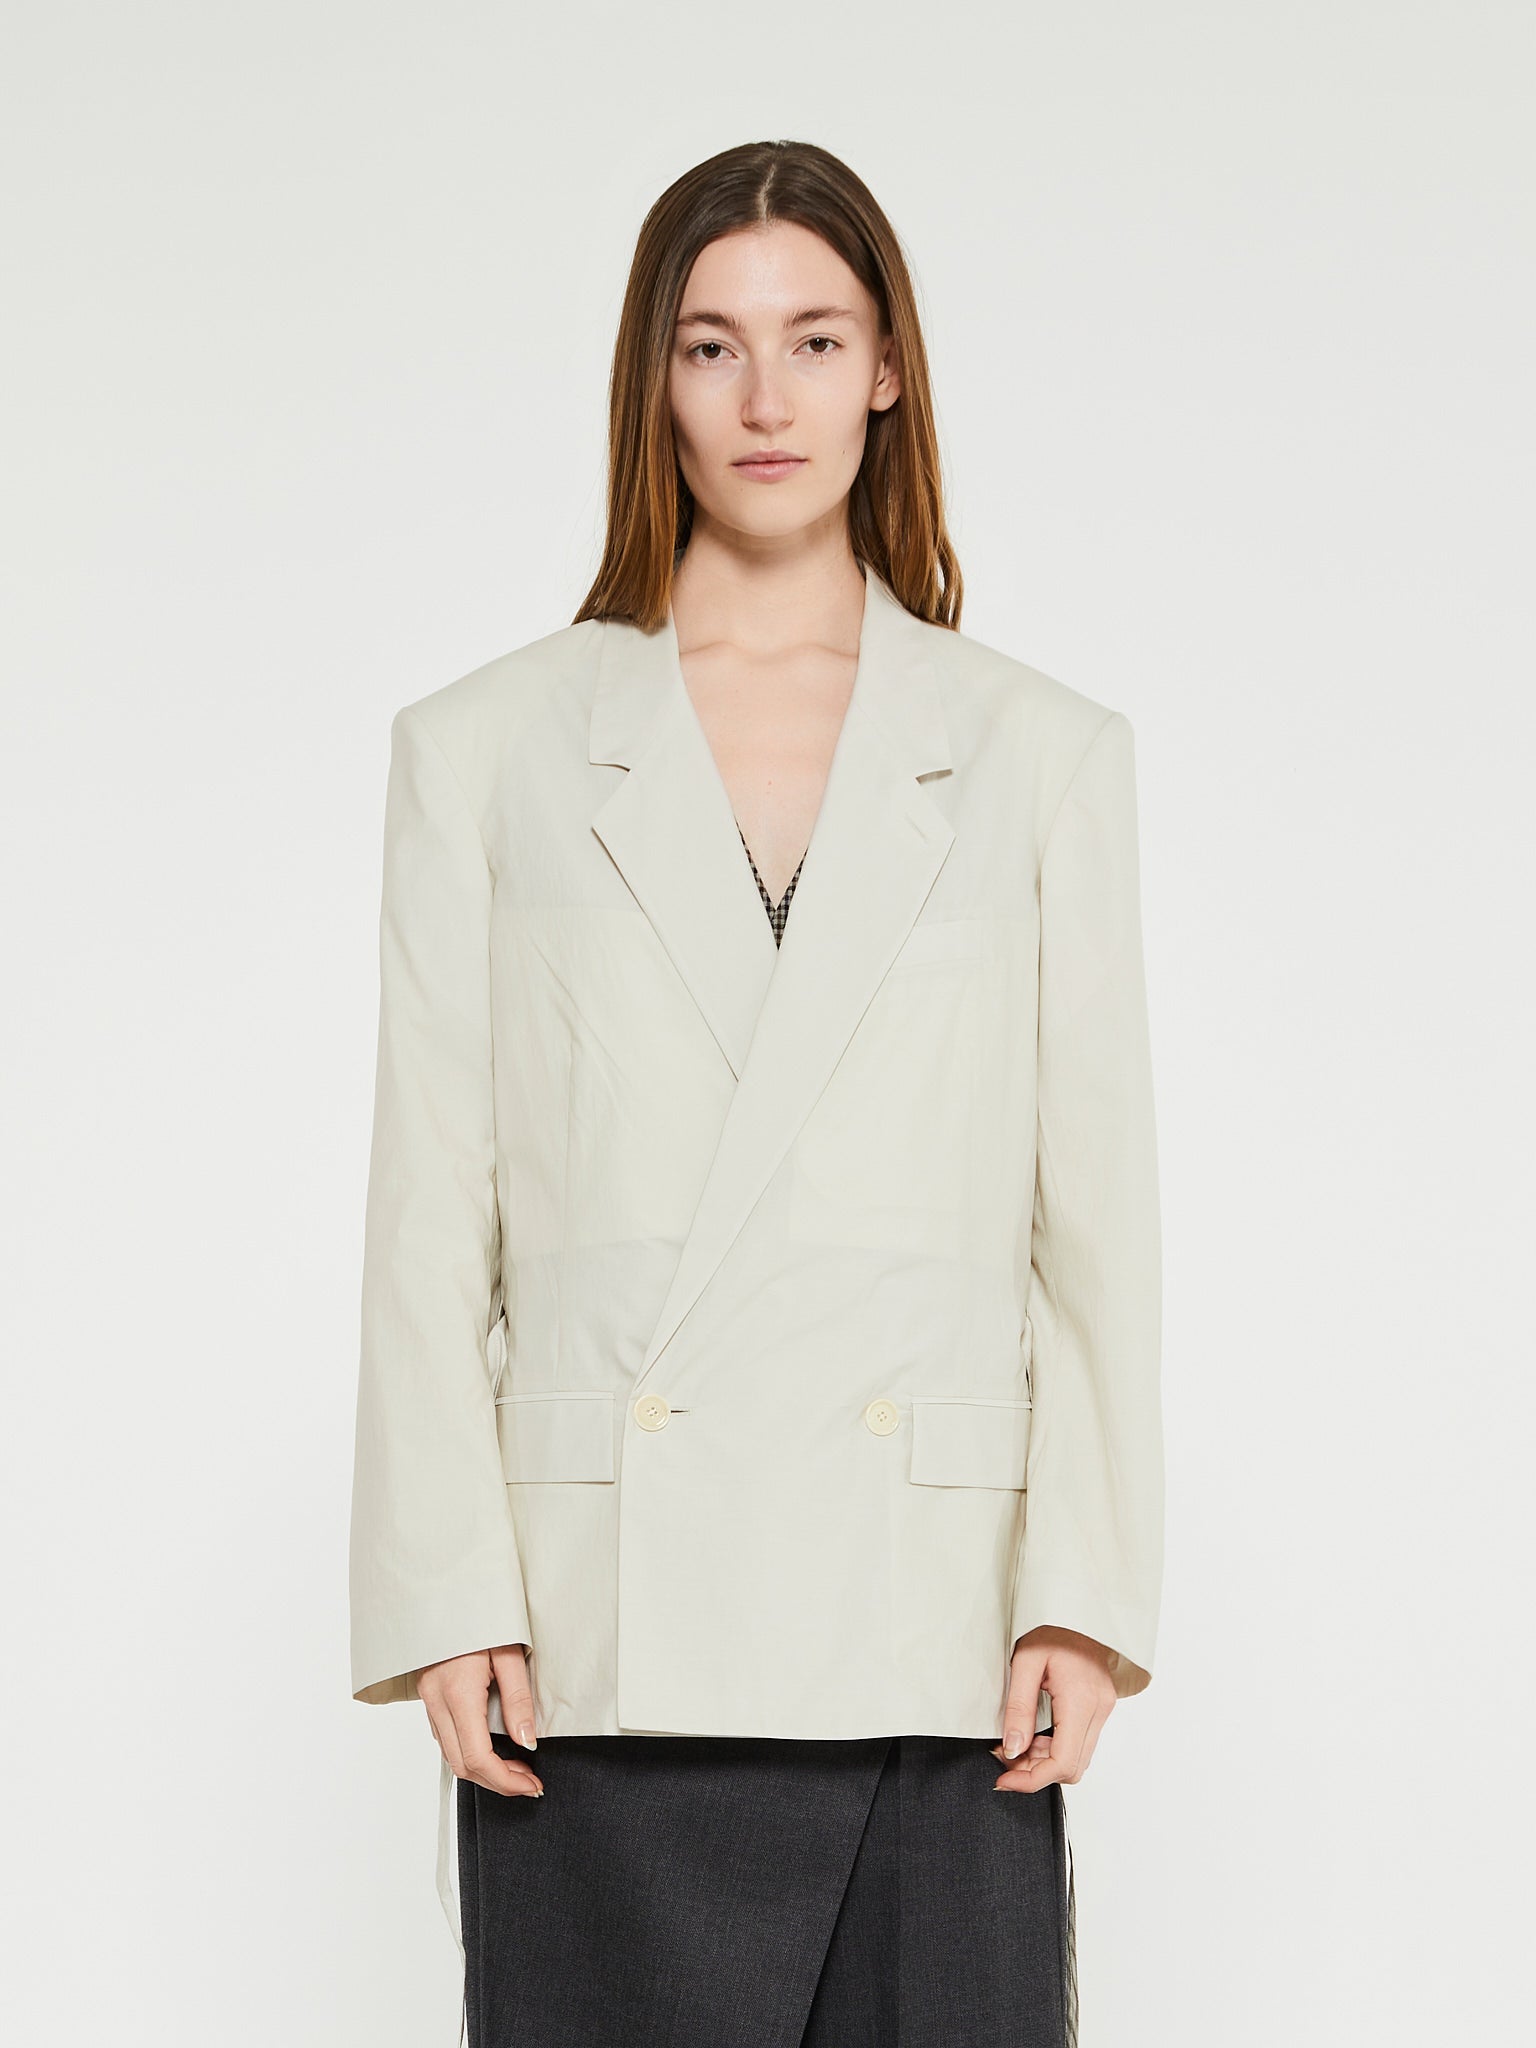 Lemaire - Belted Light Tailored Jacket in Light Grey